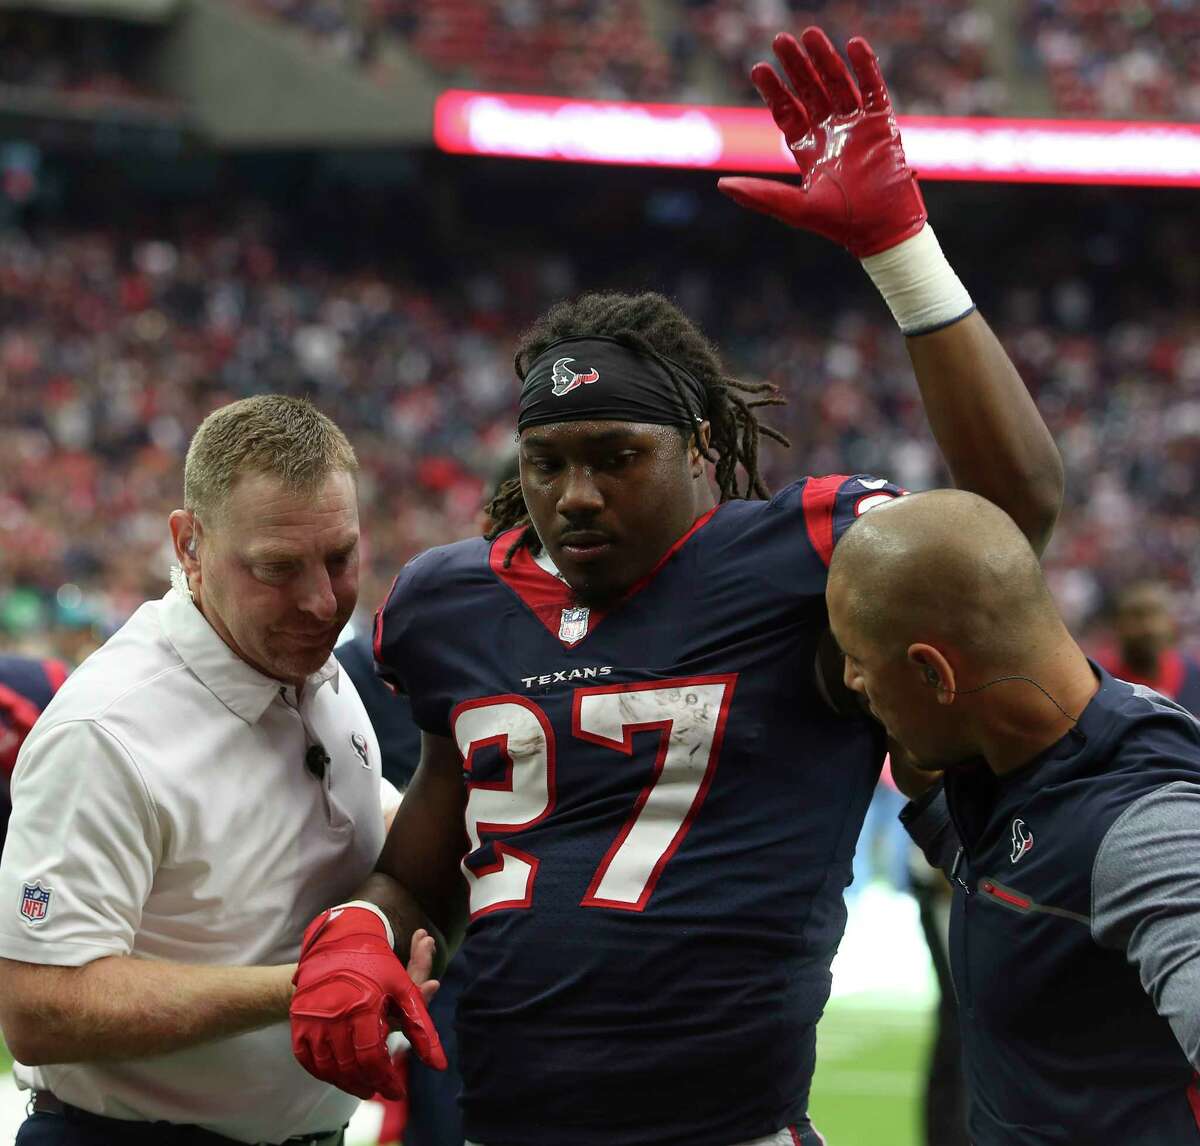 Texans running back D'Onta Foreman had to wave goodbye to his season after getting hurt.